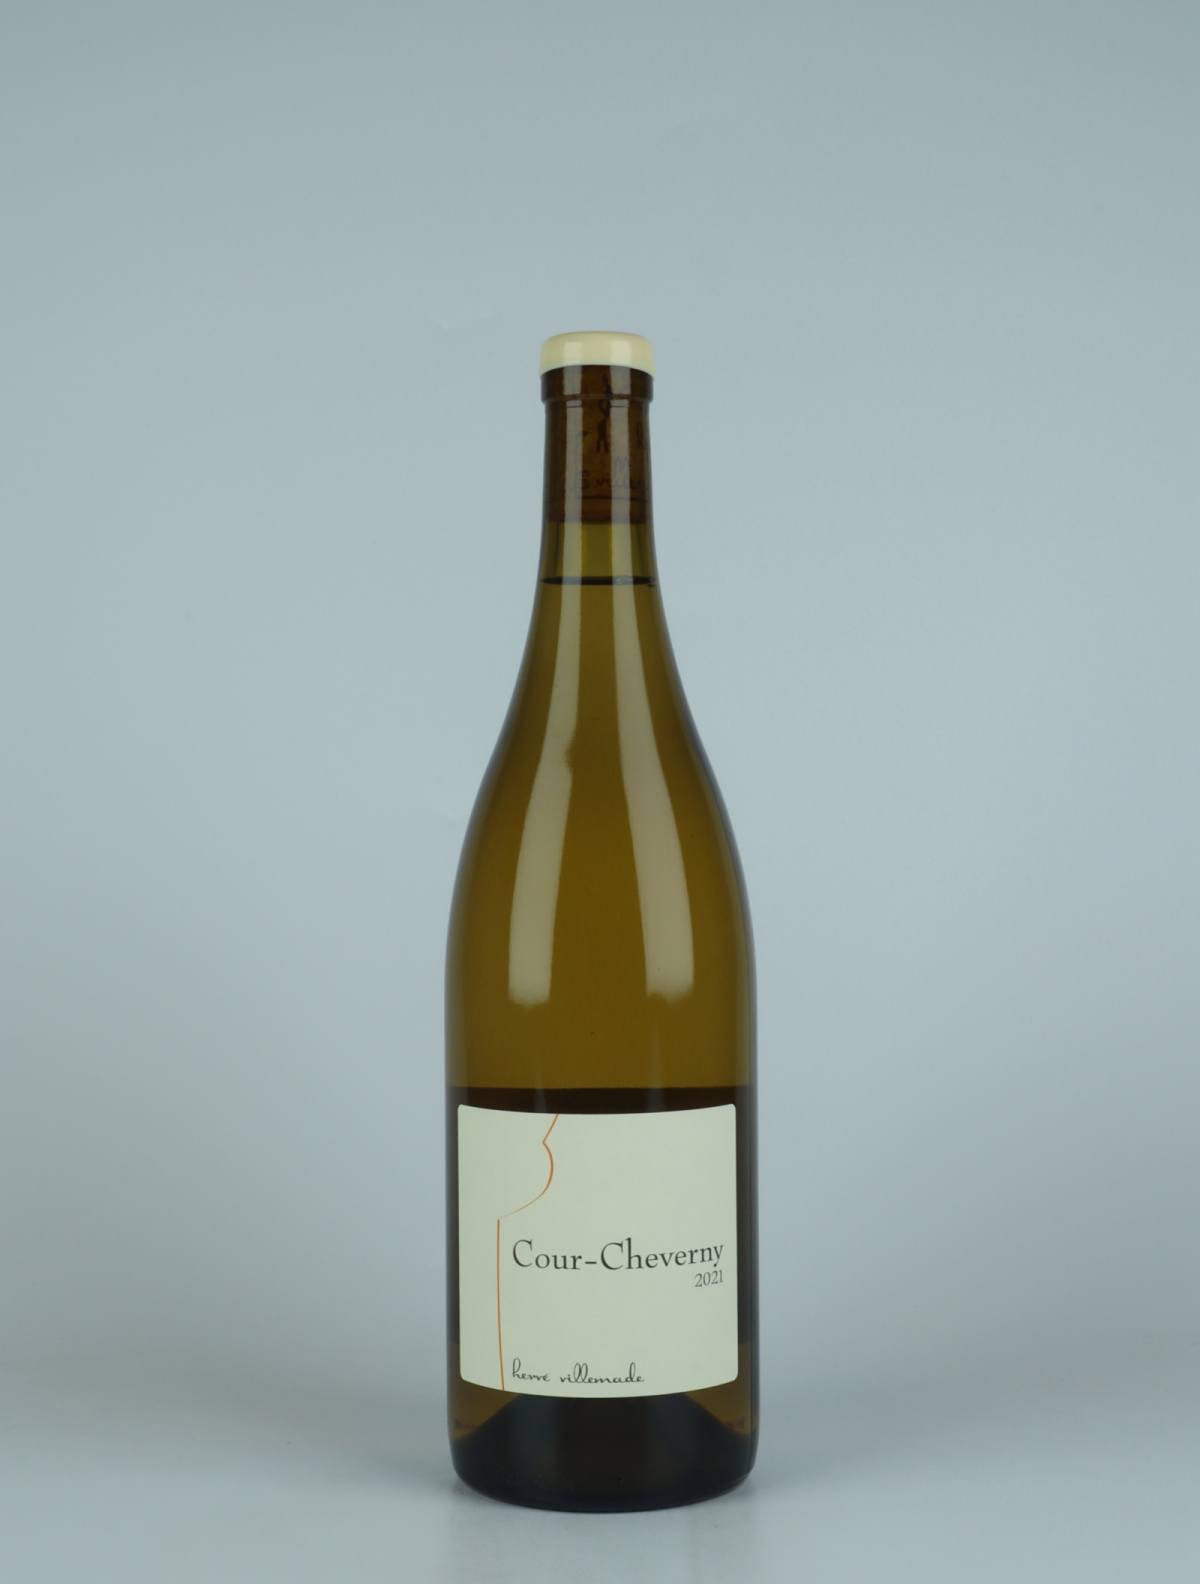 A bottle 2021 Cour-Cheverny - Domaine White wine from Hervé Villemade, Loire in France